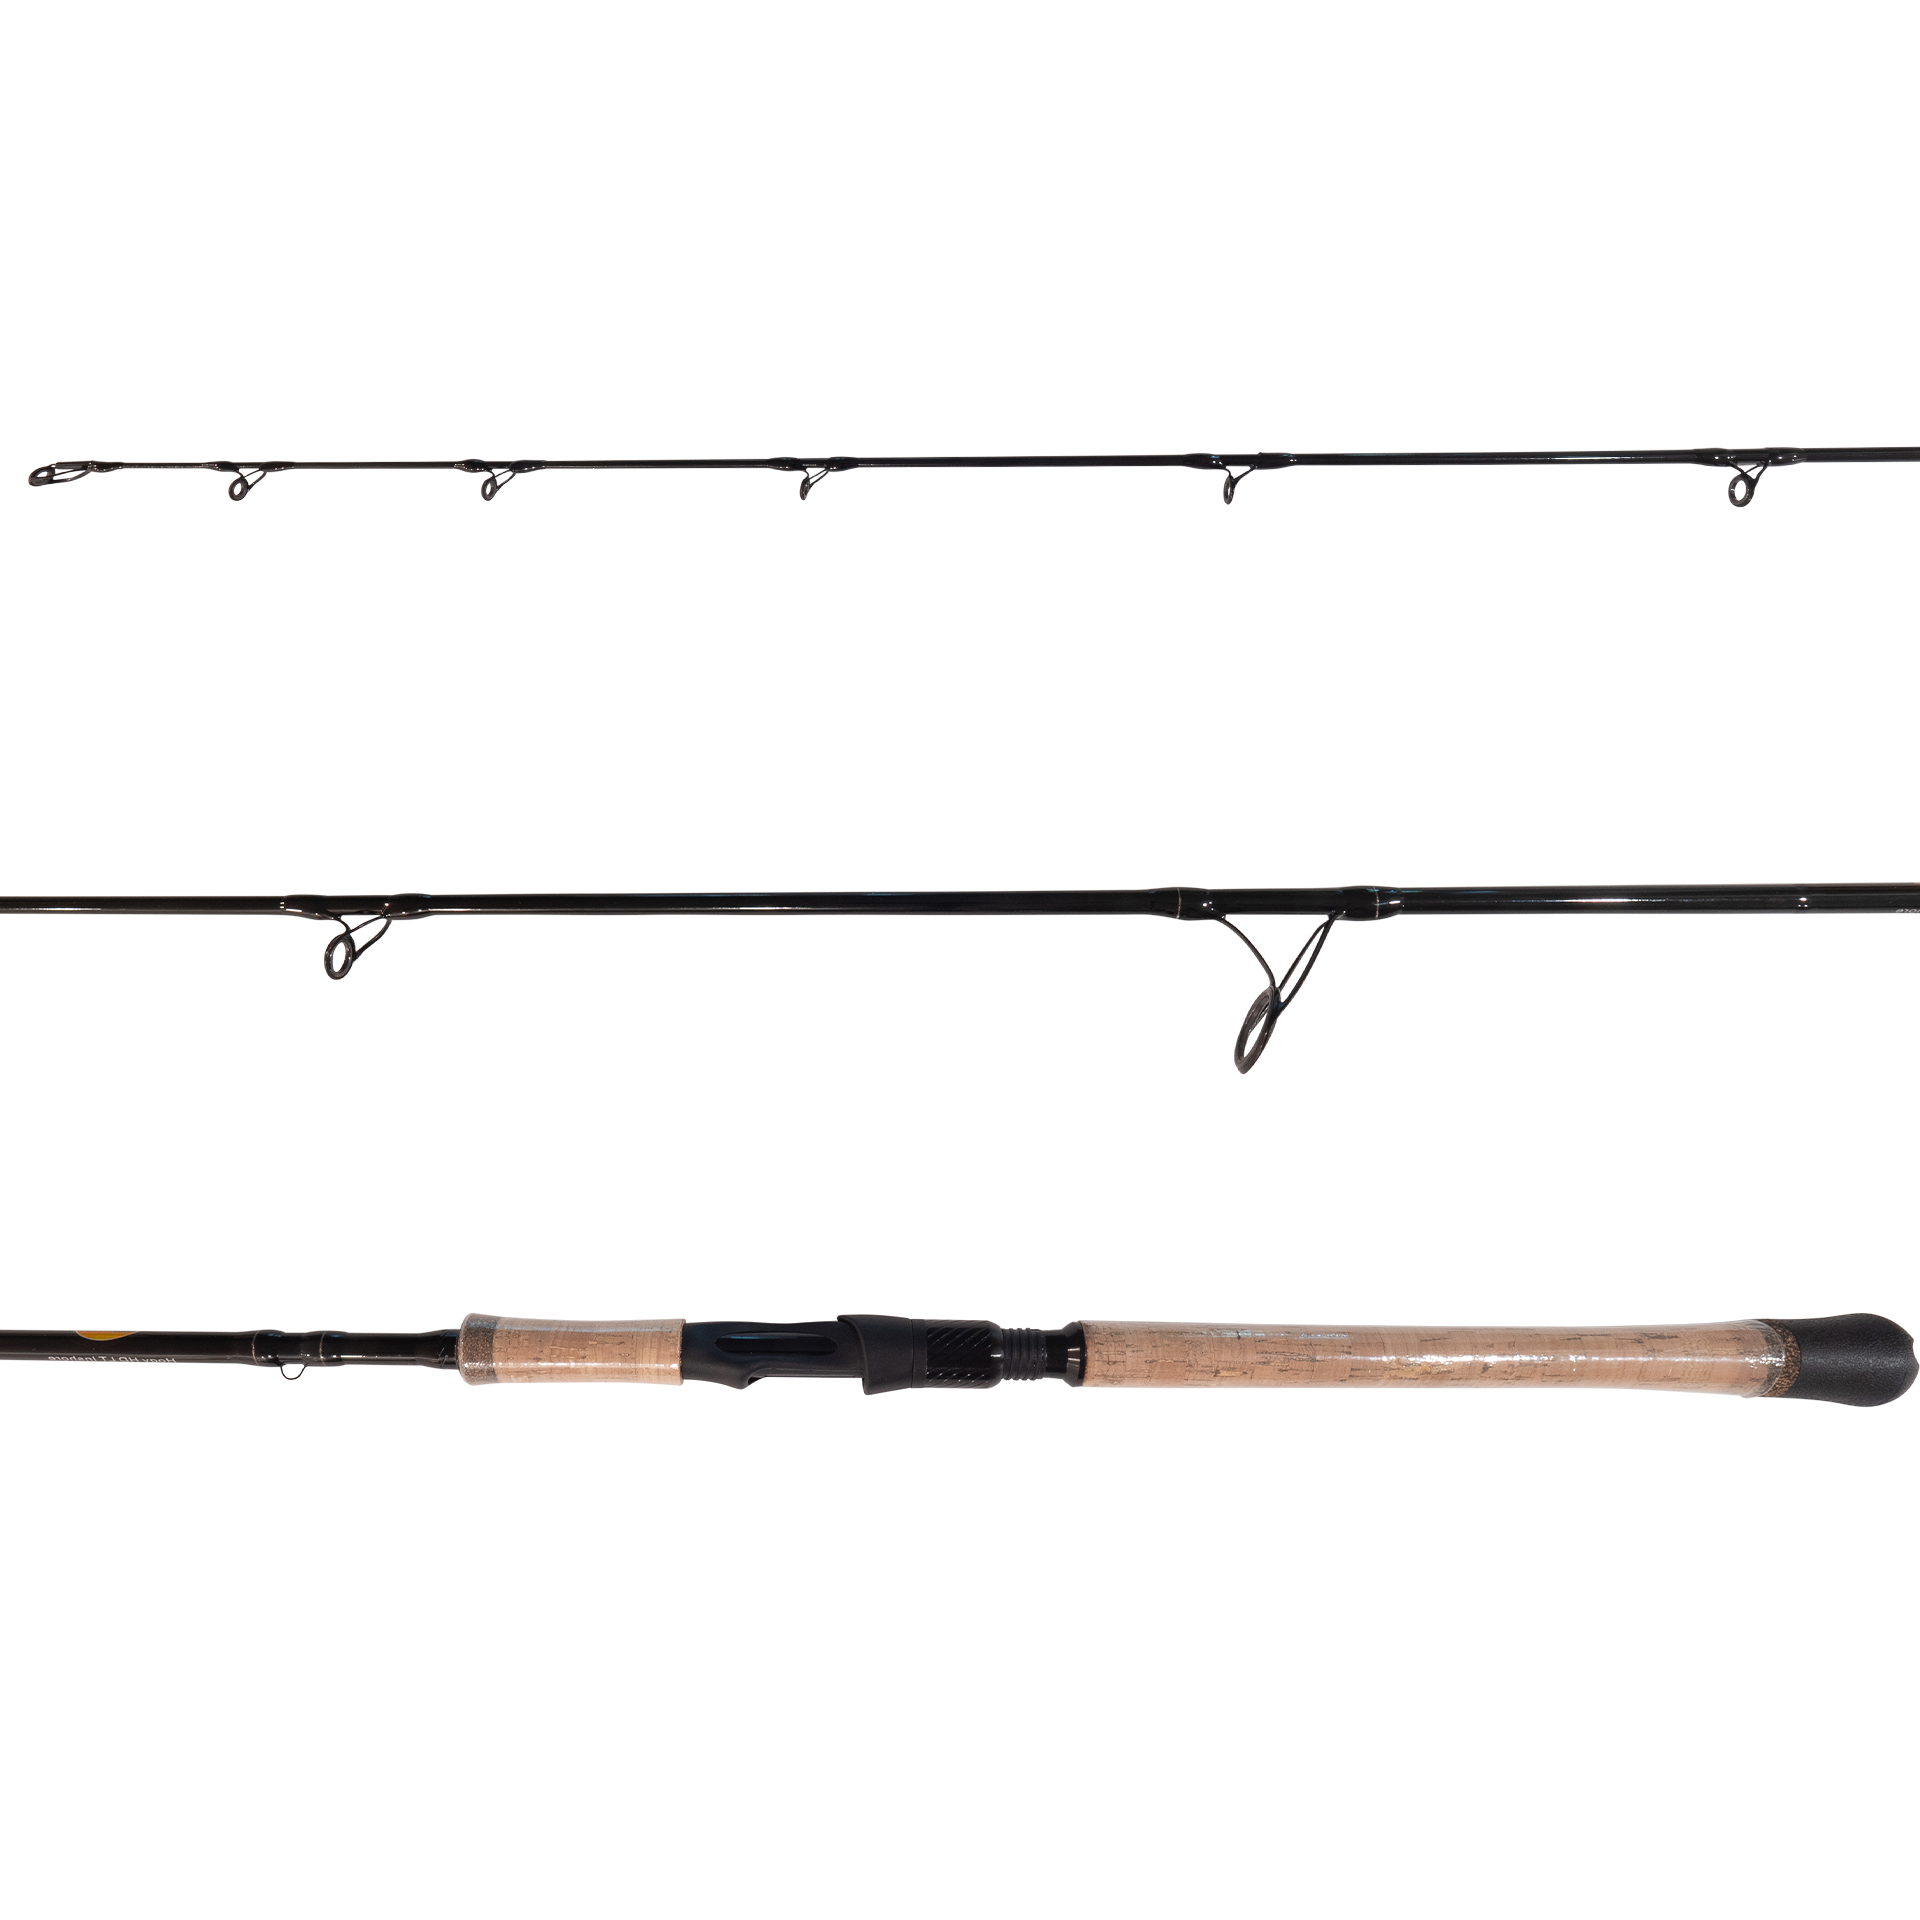 FTO Pre-Order Special: Inshore Spinning Rod: Mod-Fast Action 7' MH (3/4oz - 2oz) (Ship Date By 5/15)